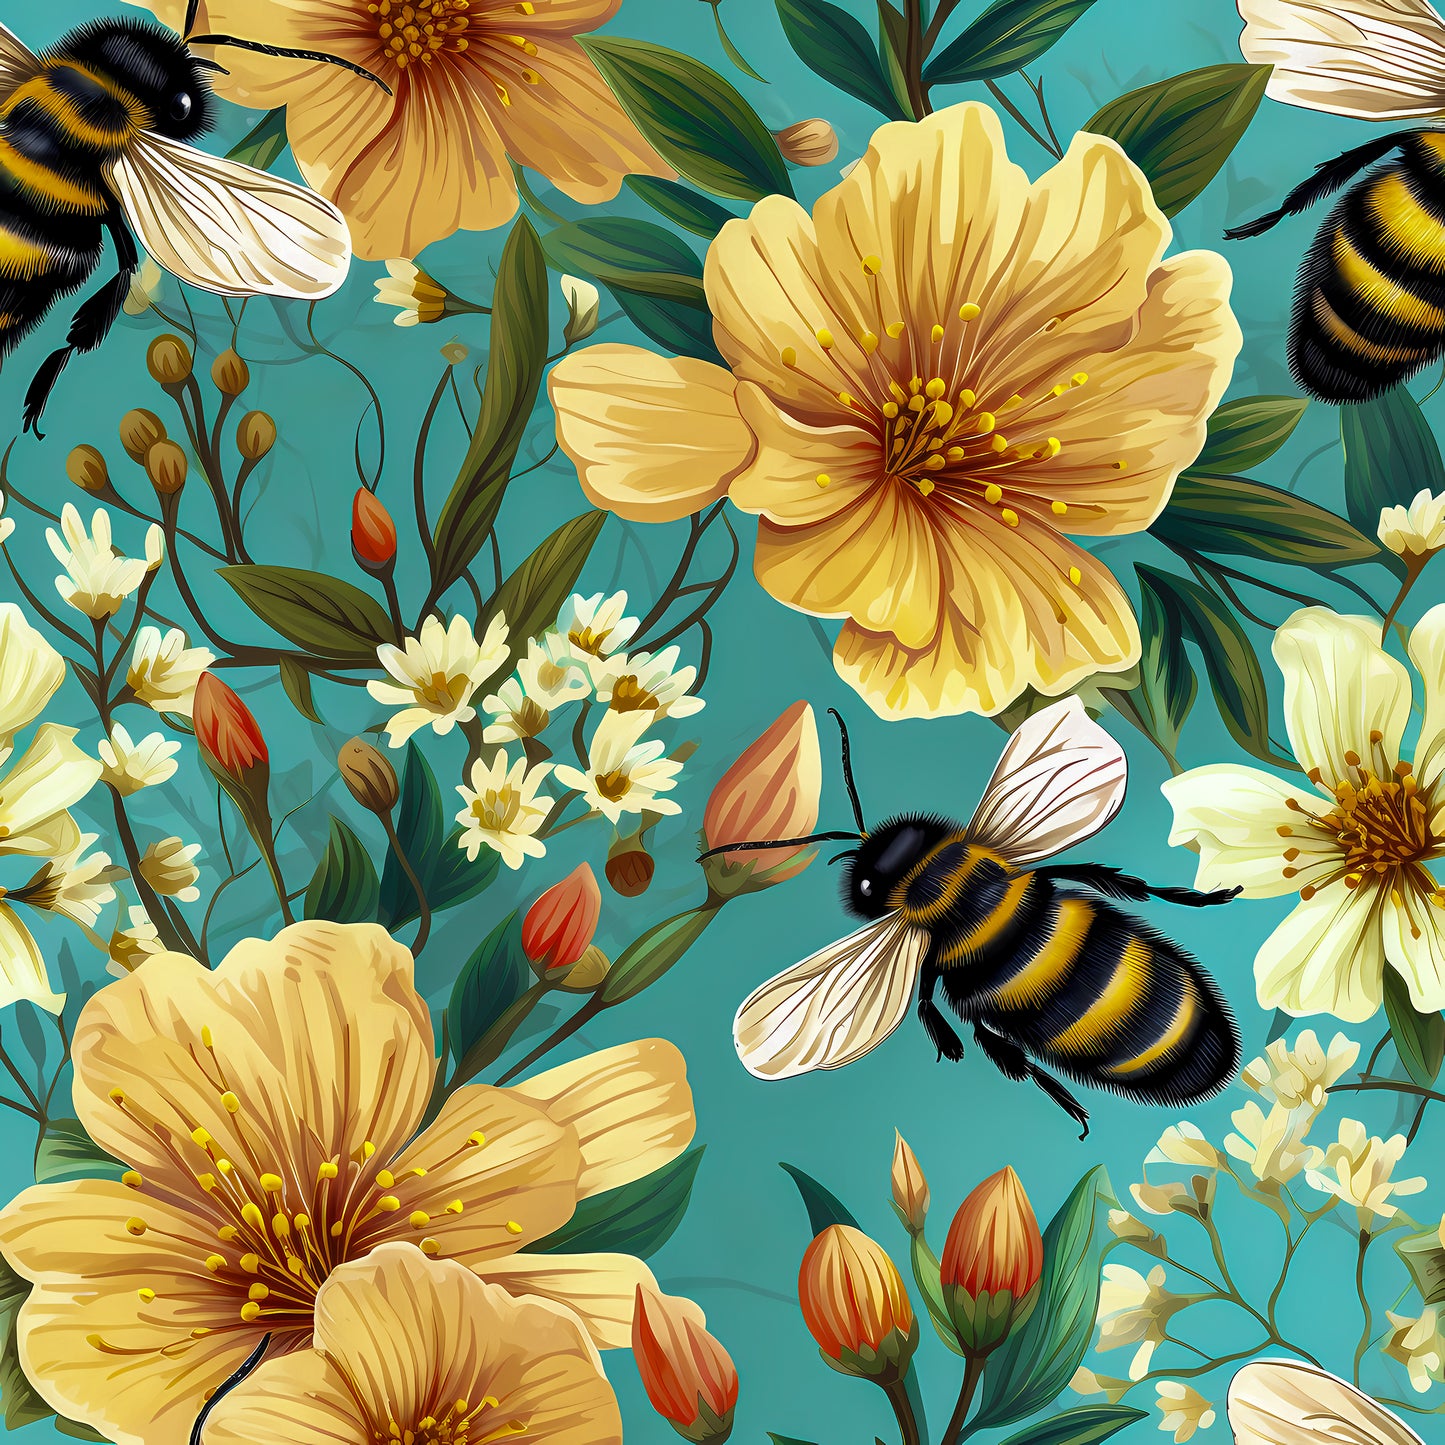 Bees and Flowers Wrapping Paper Rolls from The Curated Goose